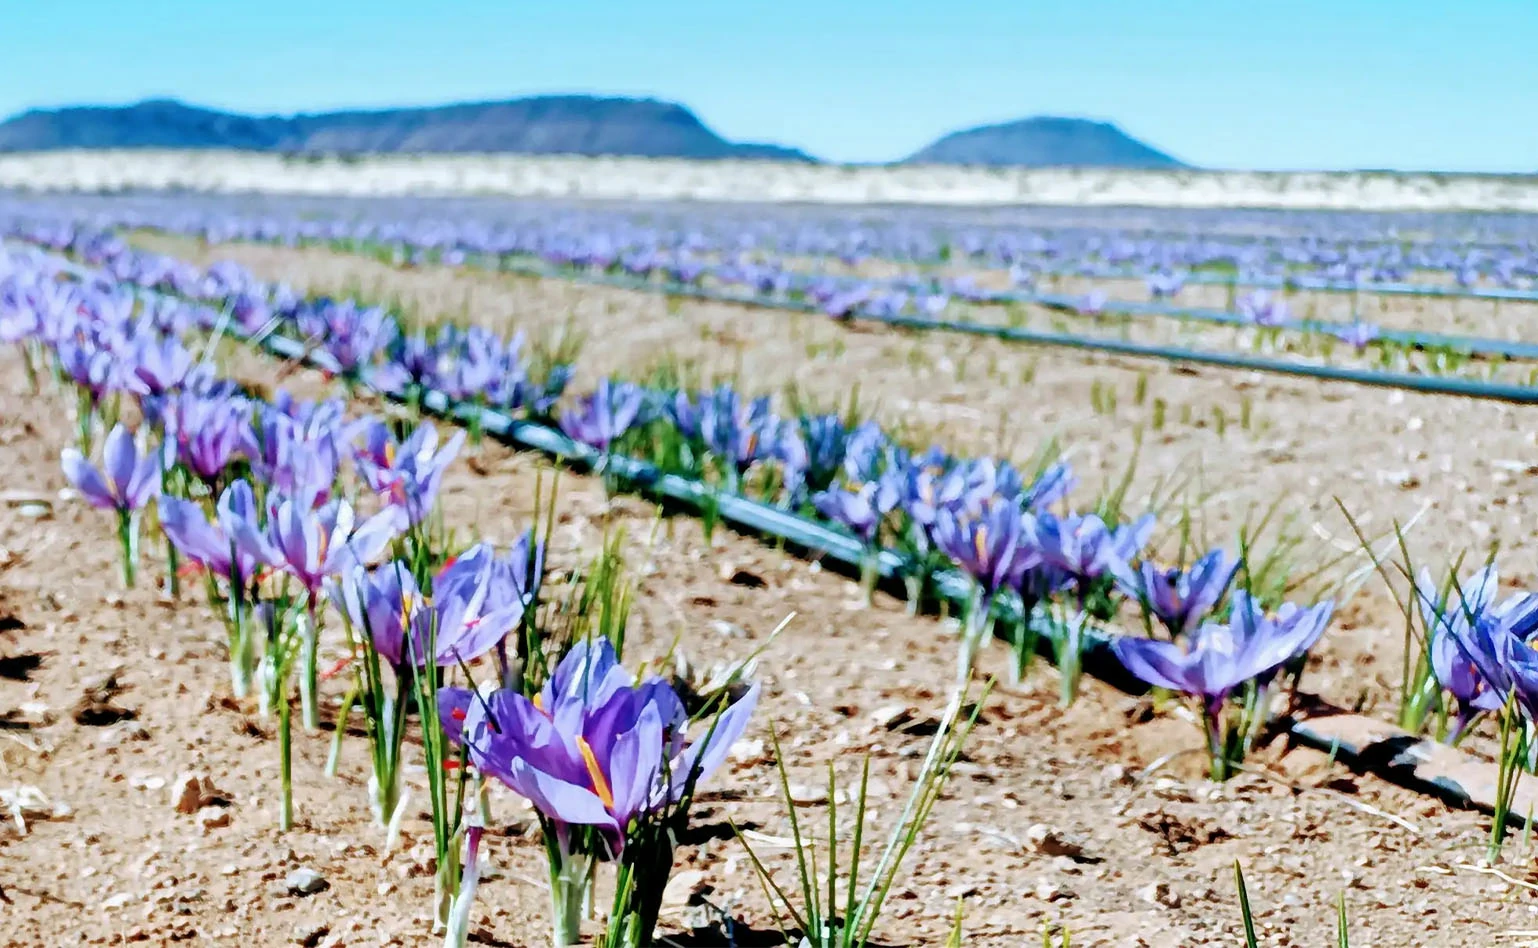 saffron yield and planting